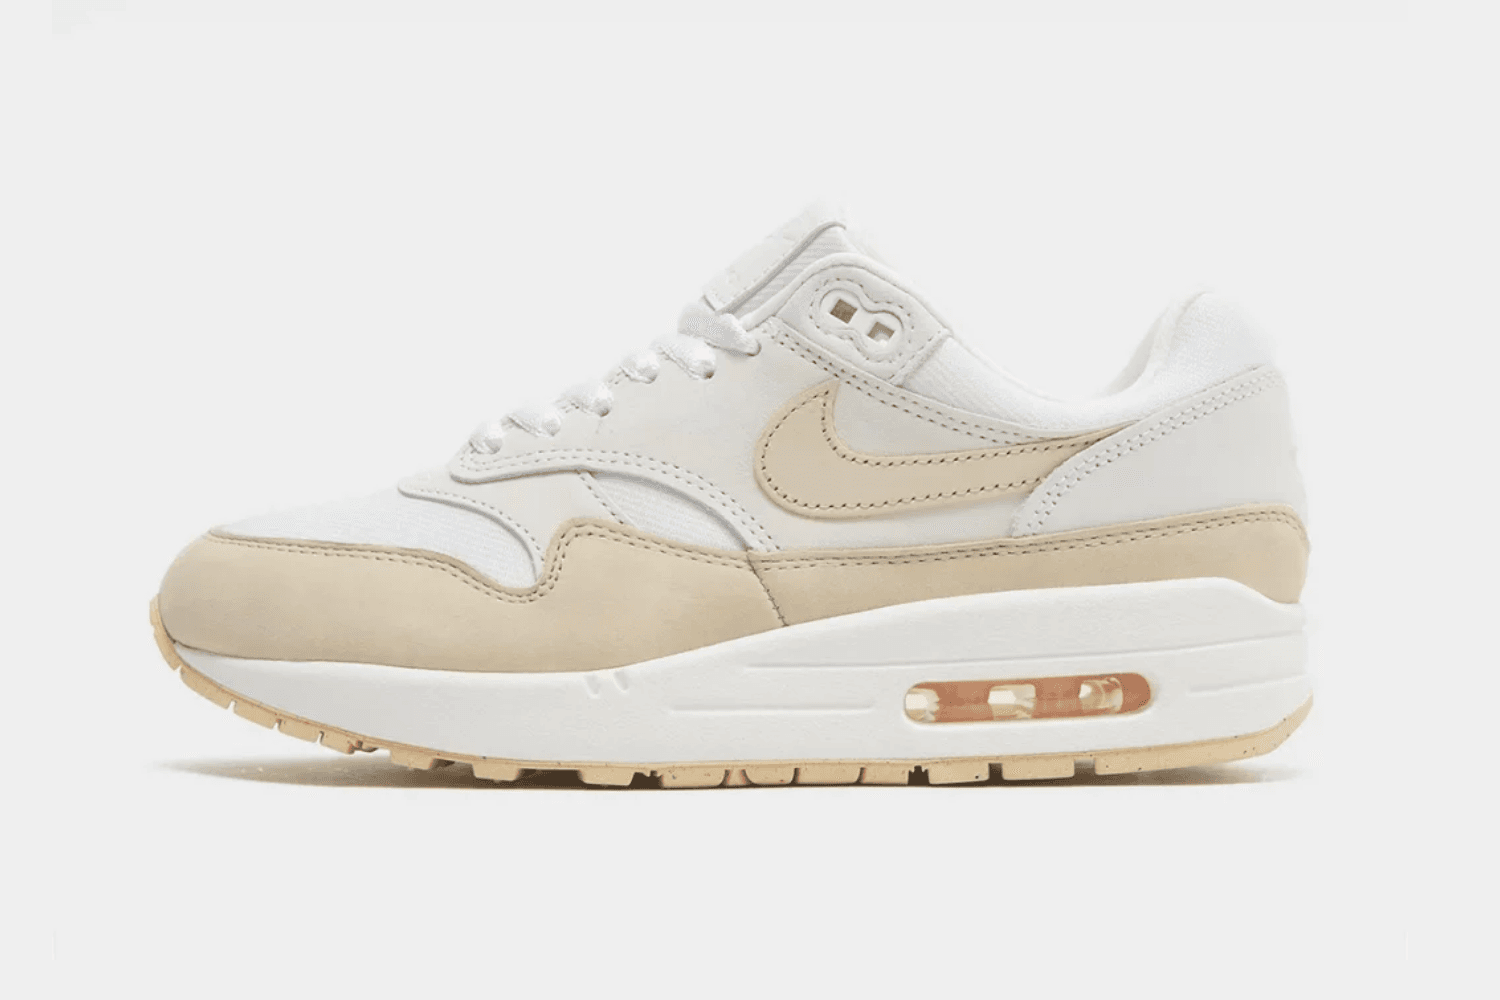 Nike Air Max 1 'Beige' comes in neutral tones  